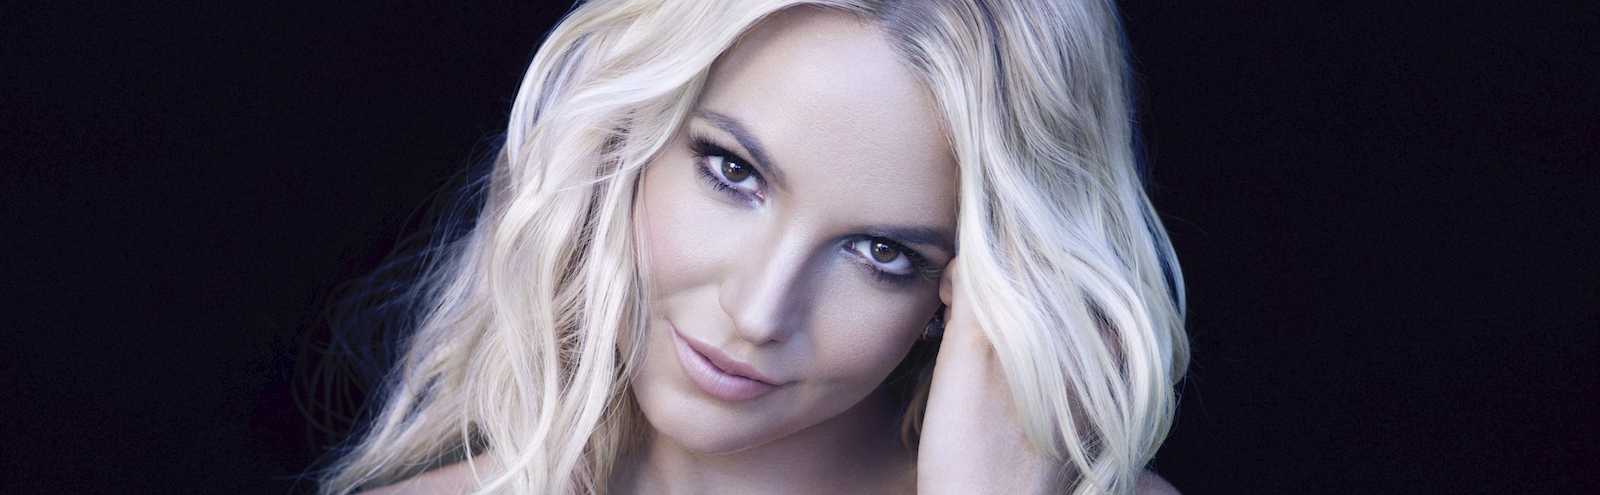 Britney Spears Free Conservatorship Terminated